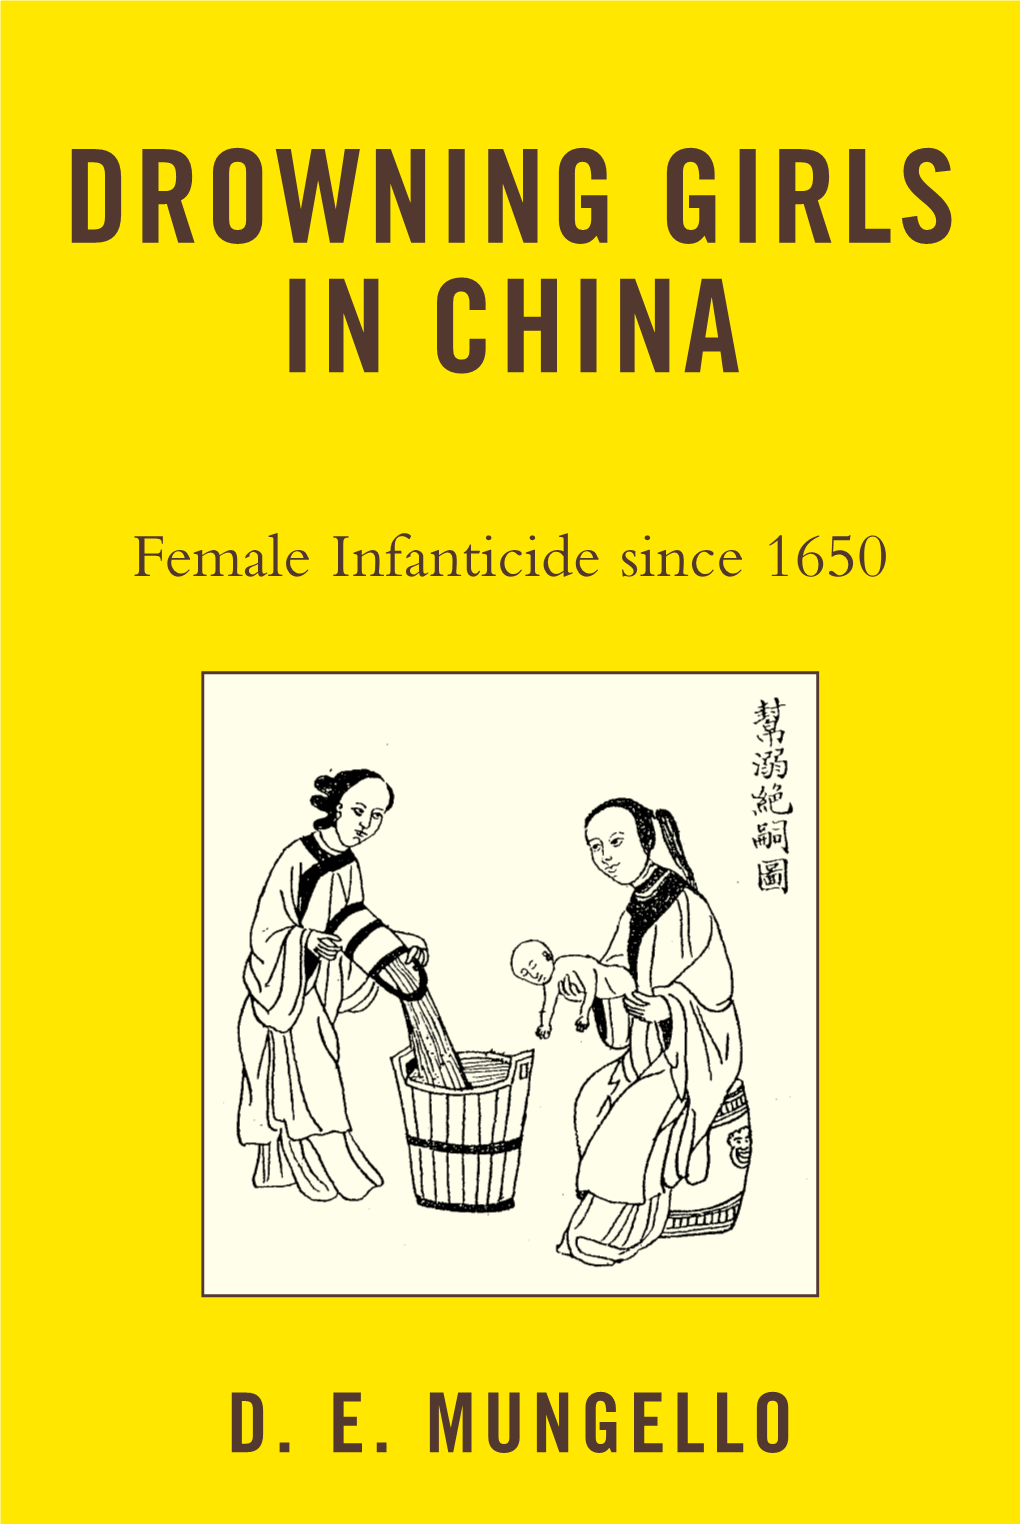 Drowning Girls in China : Female Infanticide Since 1650 / D.E